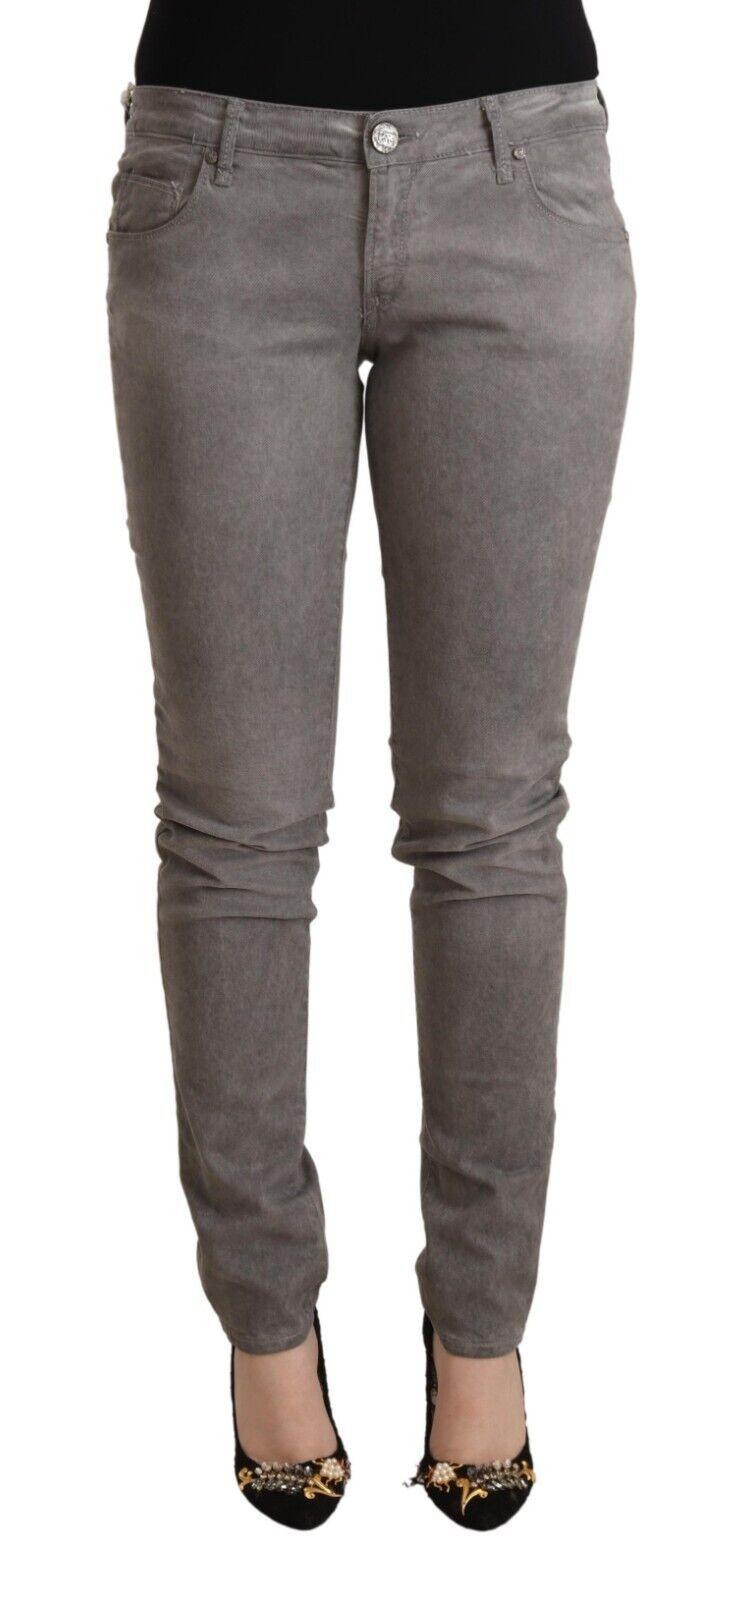 Acht Chic Gray Low Waist Skinny Cotton Jeans - PER.FASHION